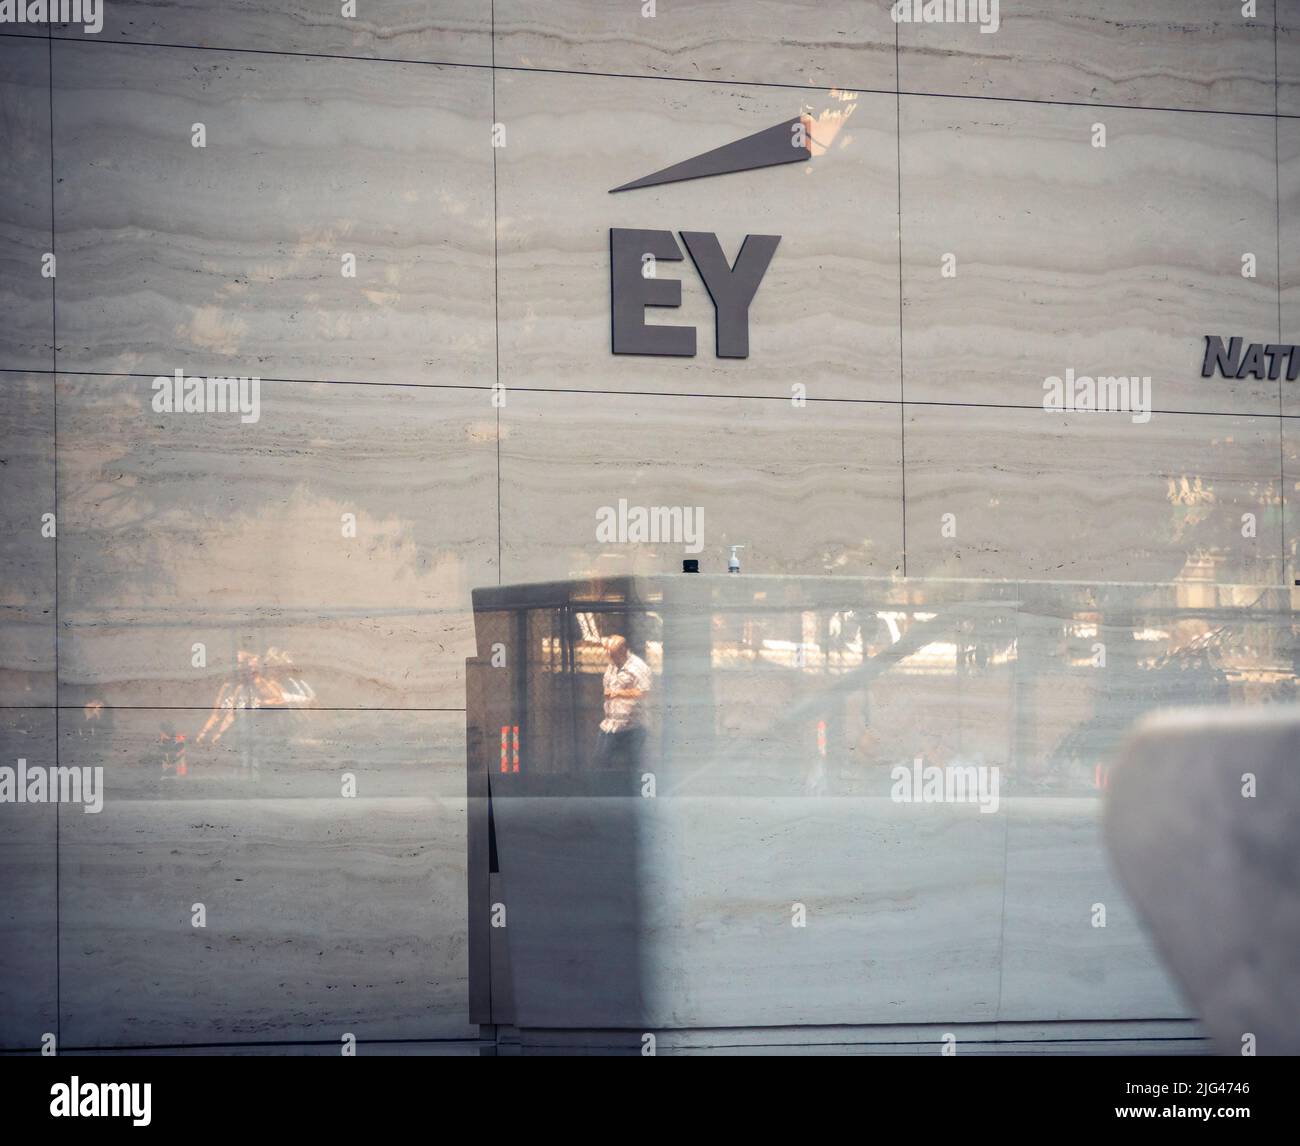 The logo of the accounting firm Ernst & Young (EY) is seen on the wall of the lobby of Brookfield’s Manhattan West office building in Hudson Yards in New York on Wednesday, June 29, 2022. EY has been fined $100 million by the SEC after it was discovered that some of its employees had cheated on their CPA exams. The cheating stretches back several years and EY was cognizant of it but did not take any action. (© Richard B. Levine) Stock Photo